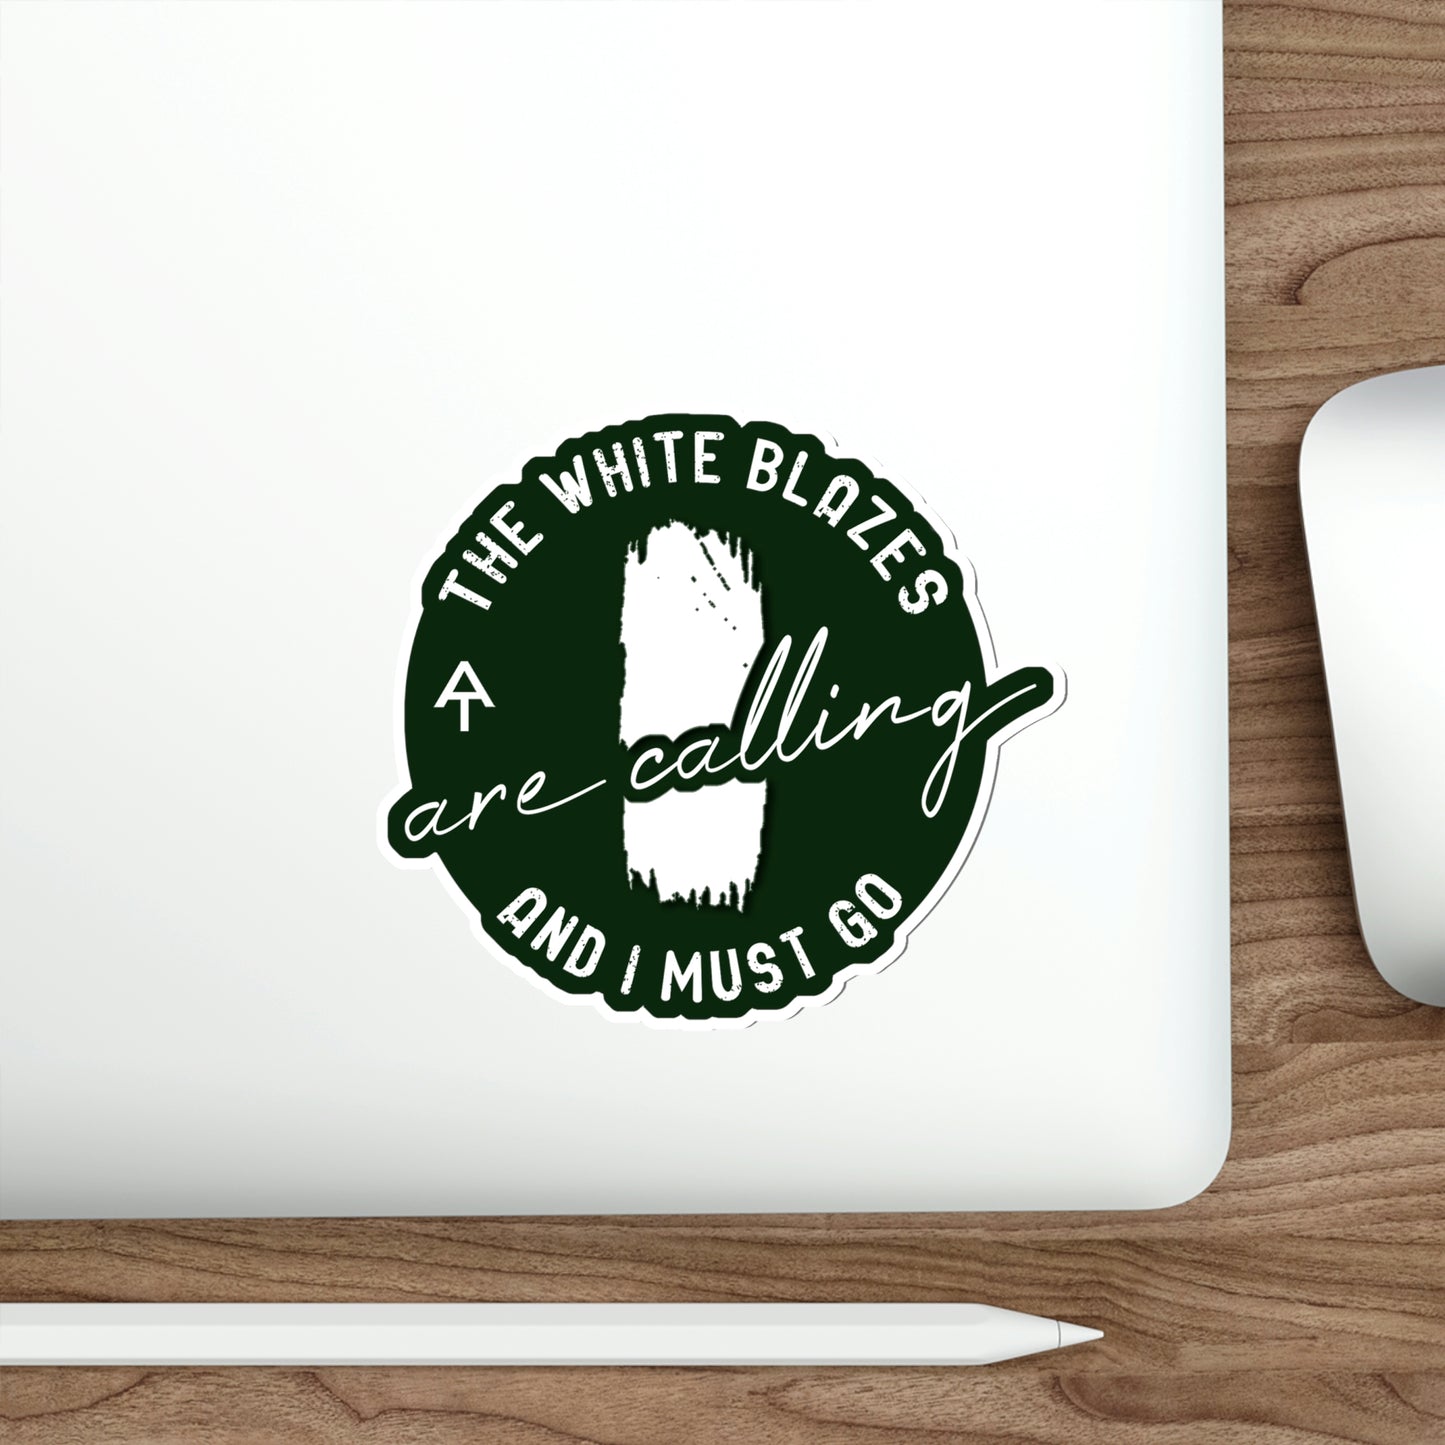 White Blazes Are Calling - Die-Cut Stickers